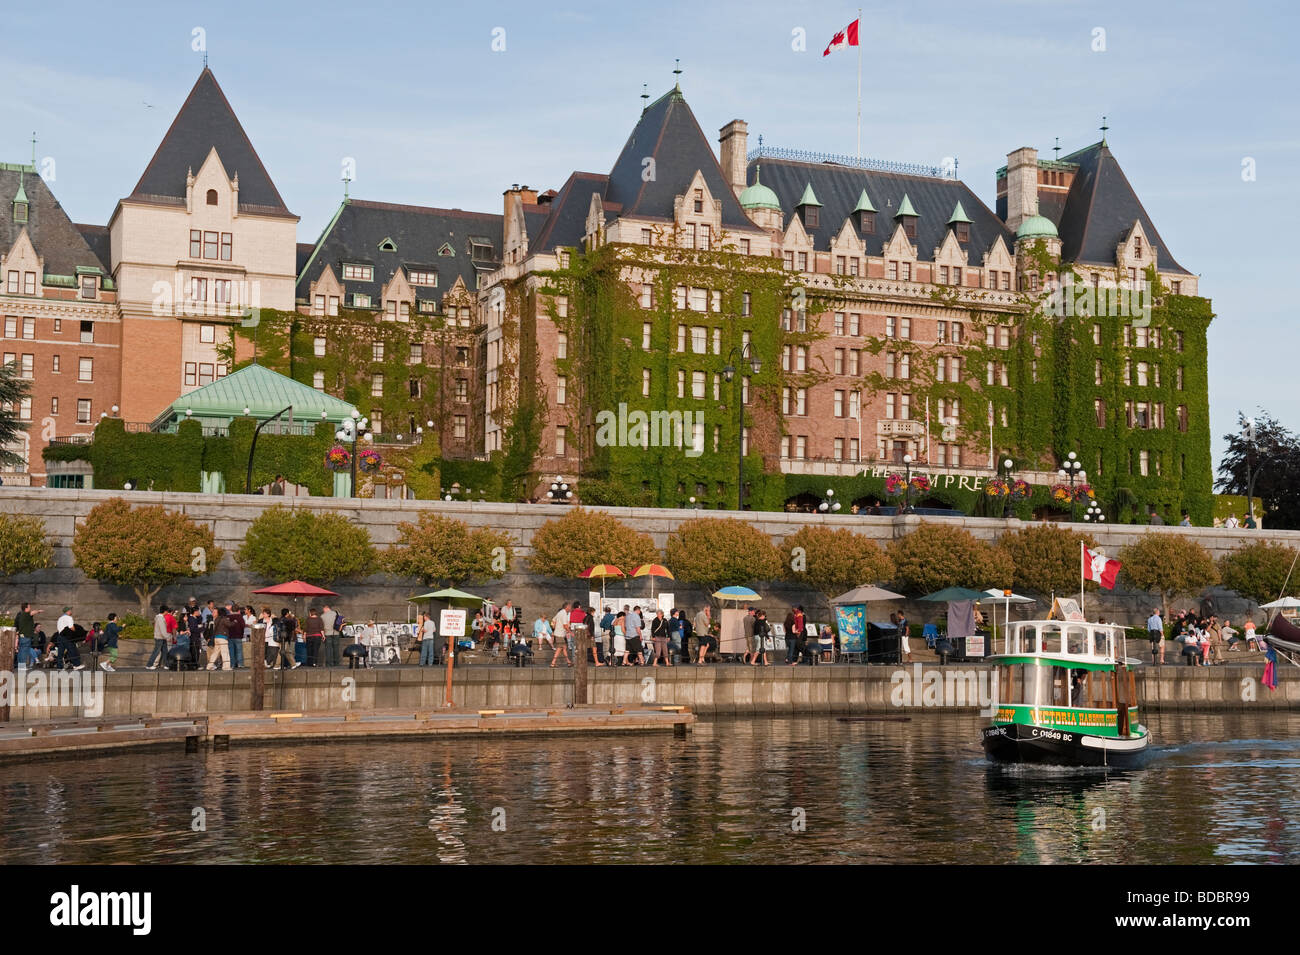 A water taxi ferries tourists around the inner harbor of Victoria, British Columbia, Canada. The Empress Hotel in the background Stock Photo